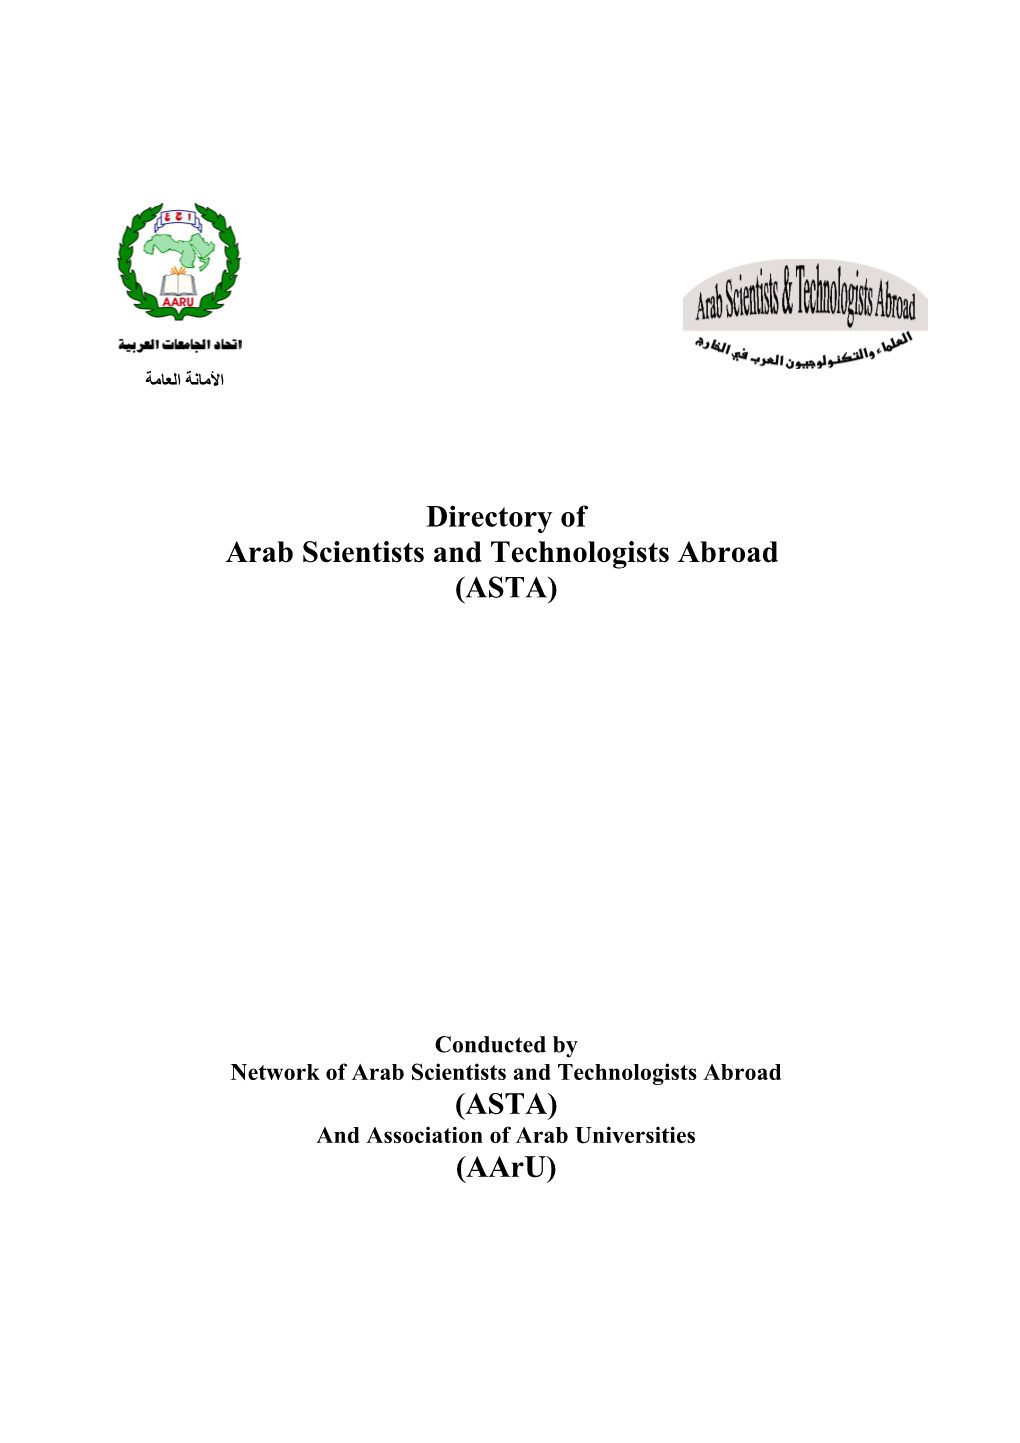 Arab Scientists and Technologists Abroad